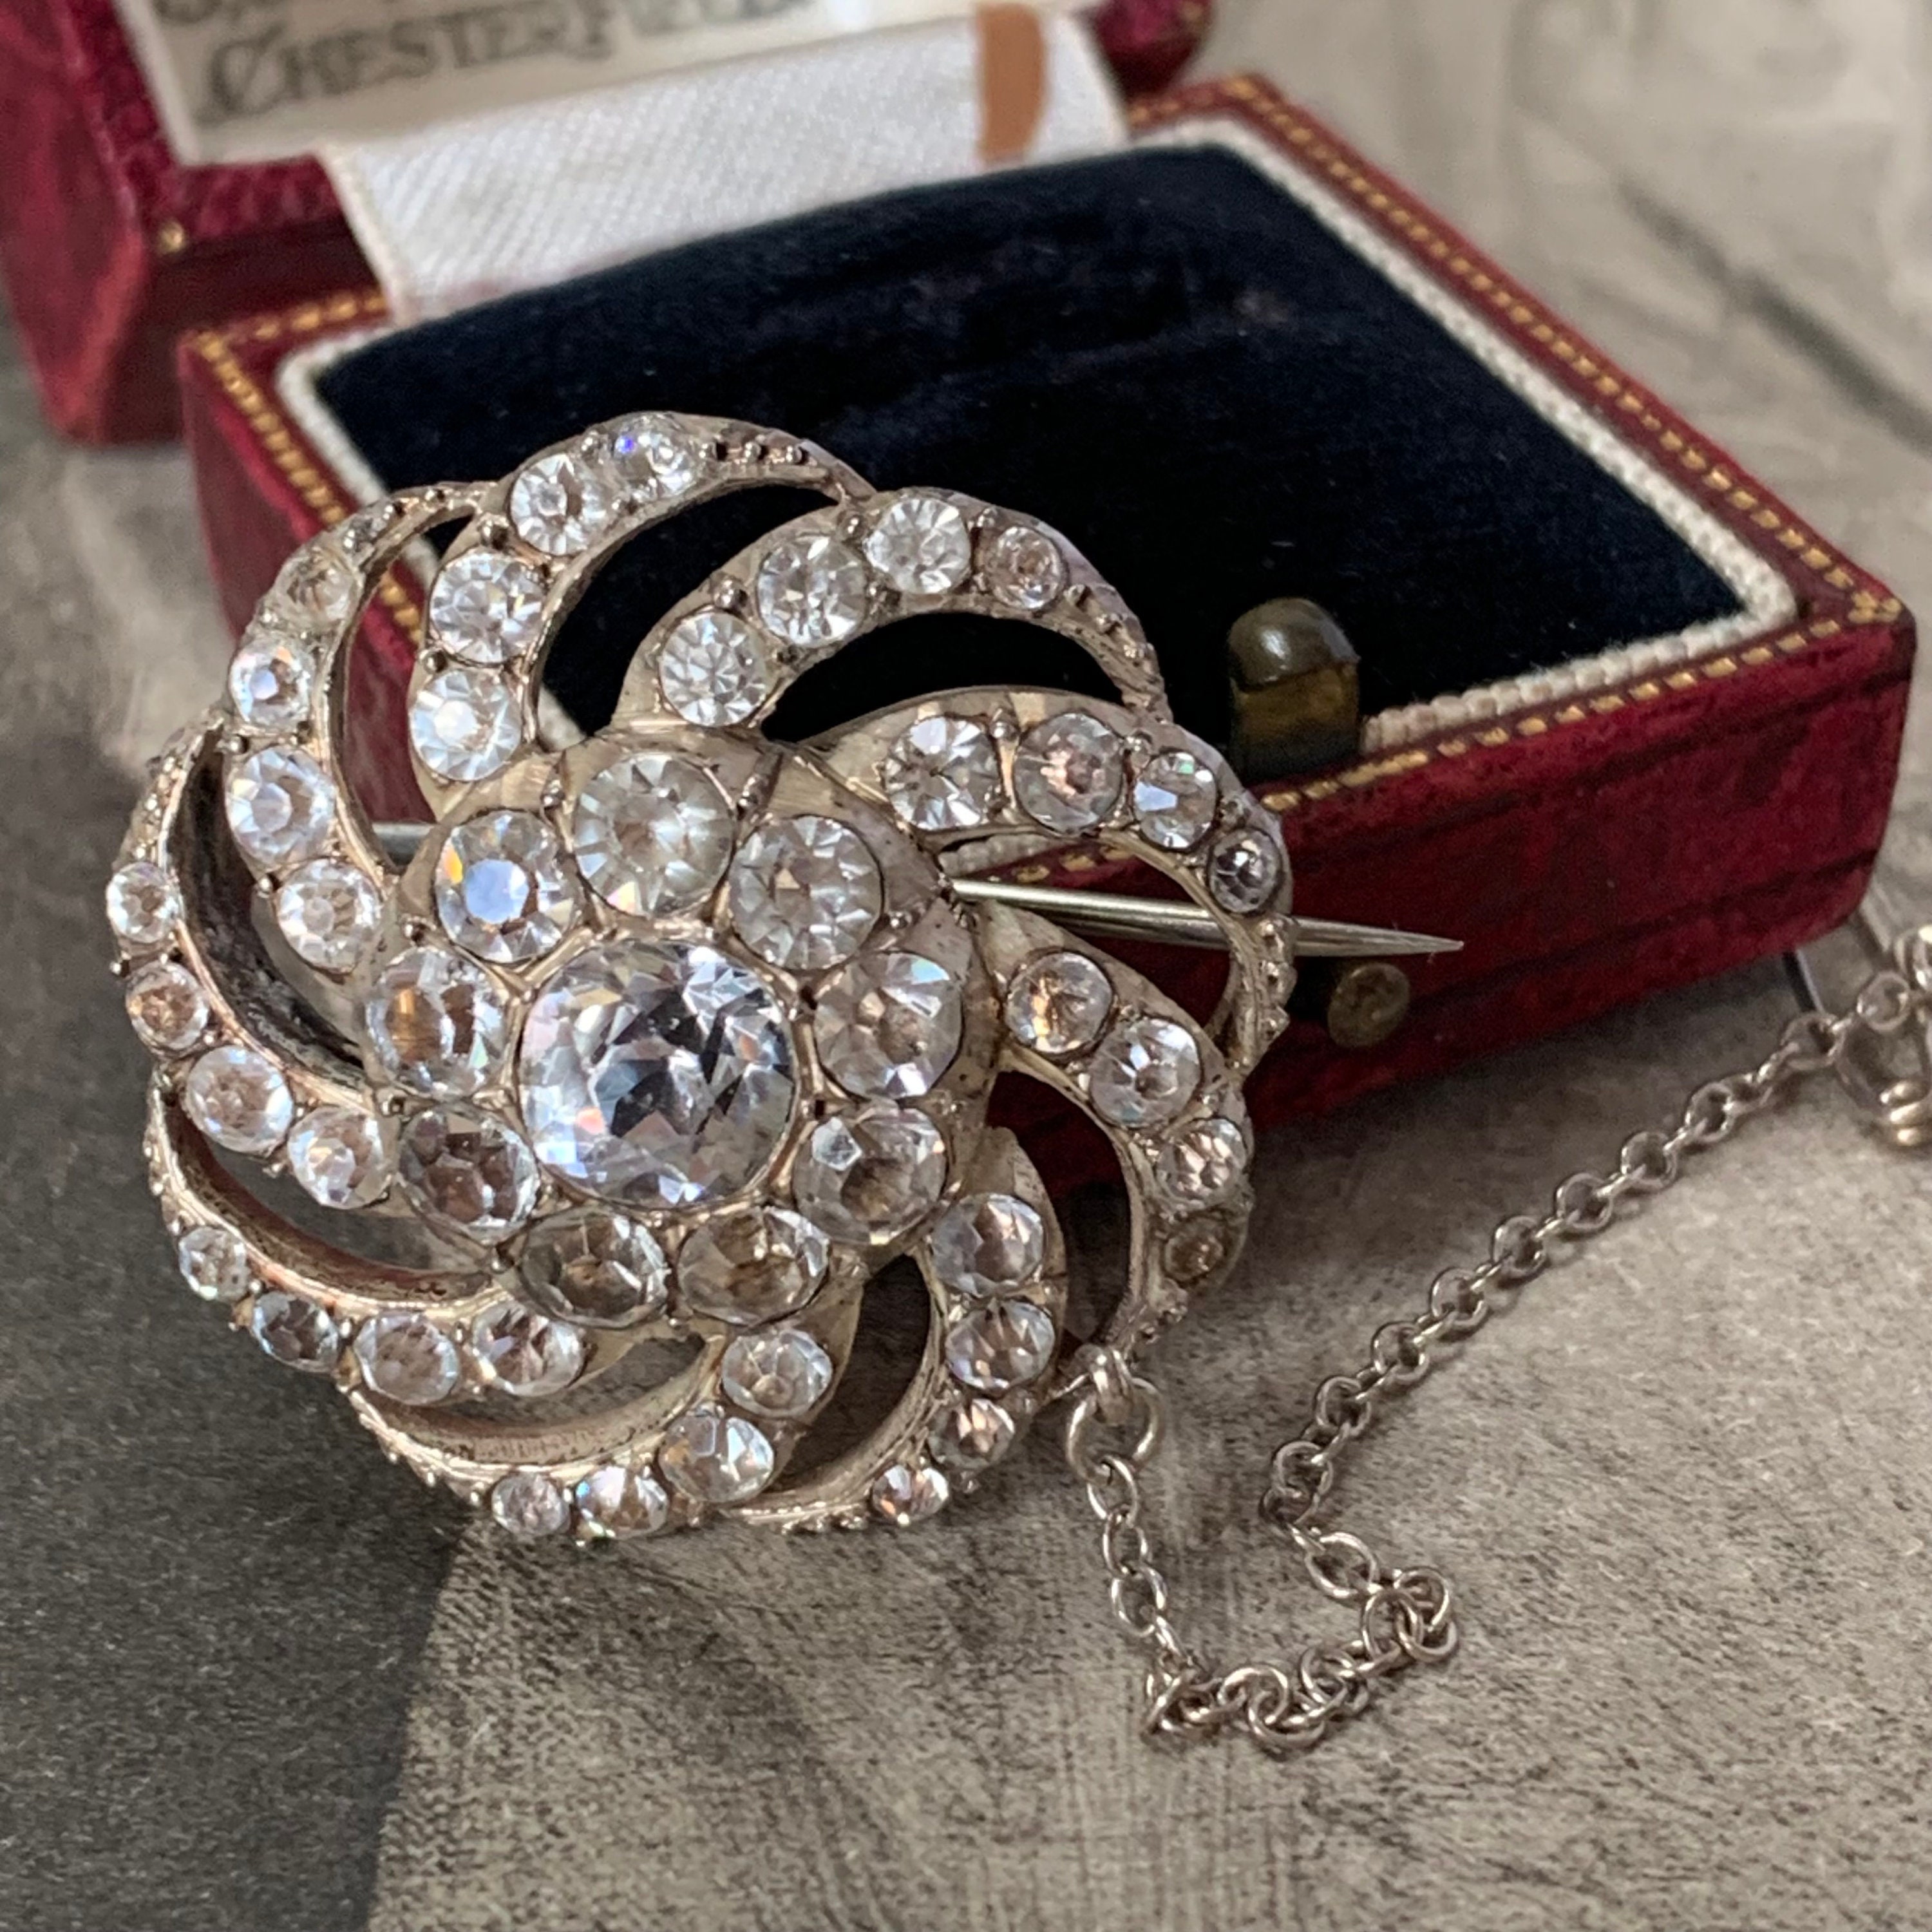 Victorian Silver Celestial Swirl Brooch Set With Sparkling Paste Diamonds. This Beautiful Star Looks Fantastic Formal Or Casual Wear